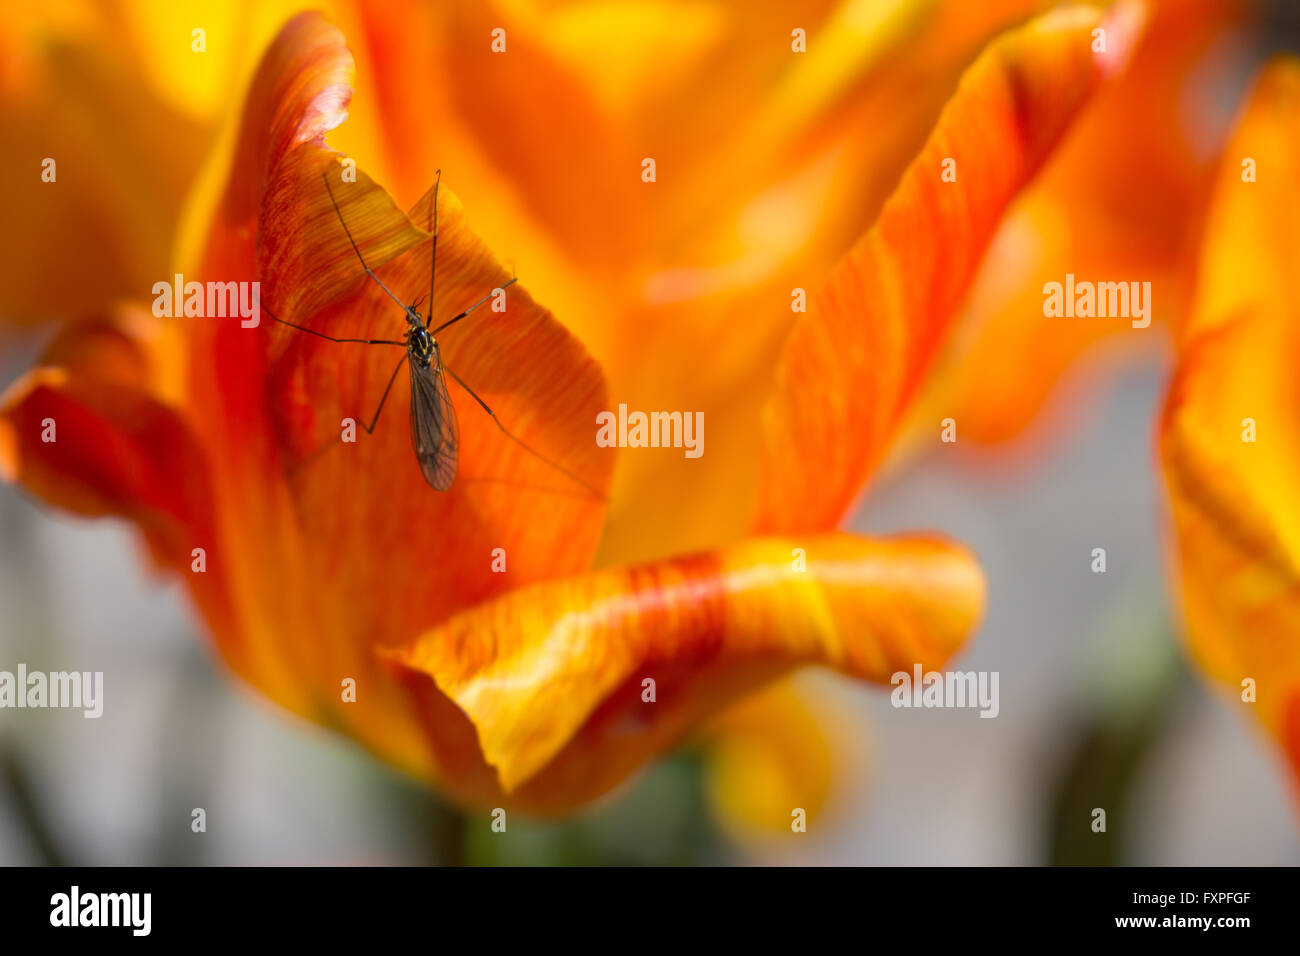 Spotted crane fly on an orange tulip Stock Photo